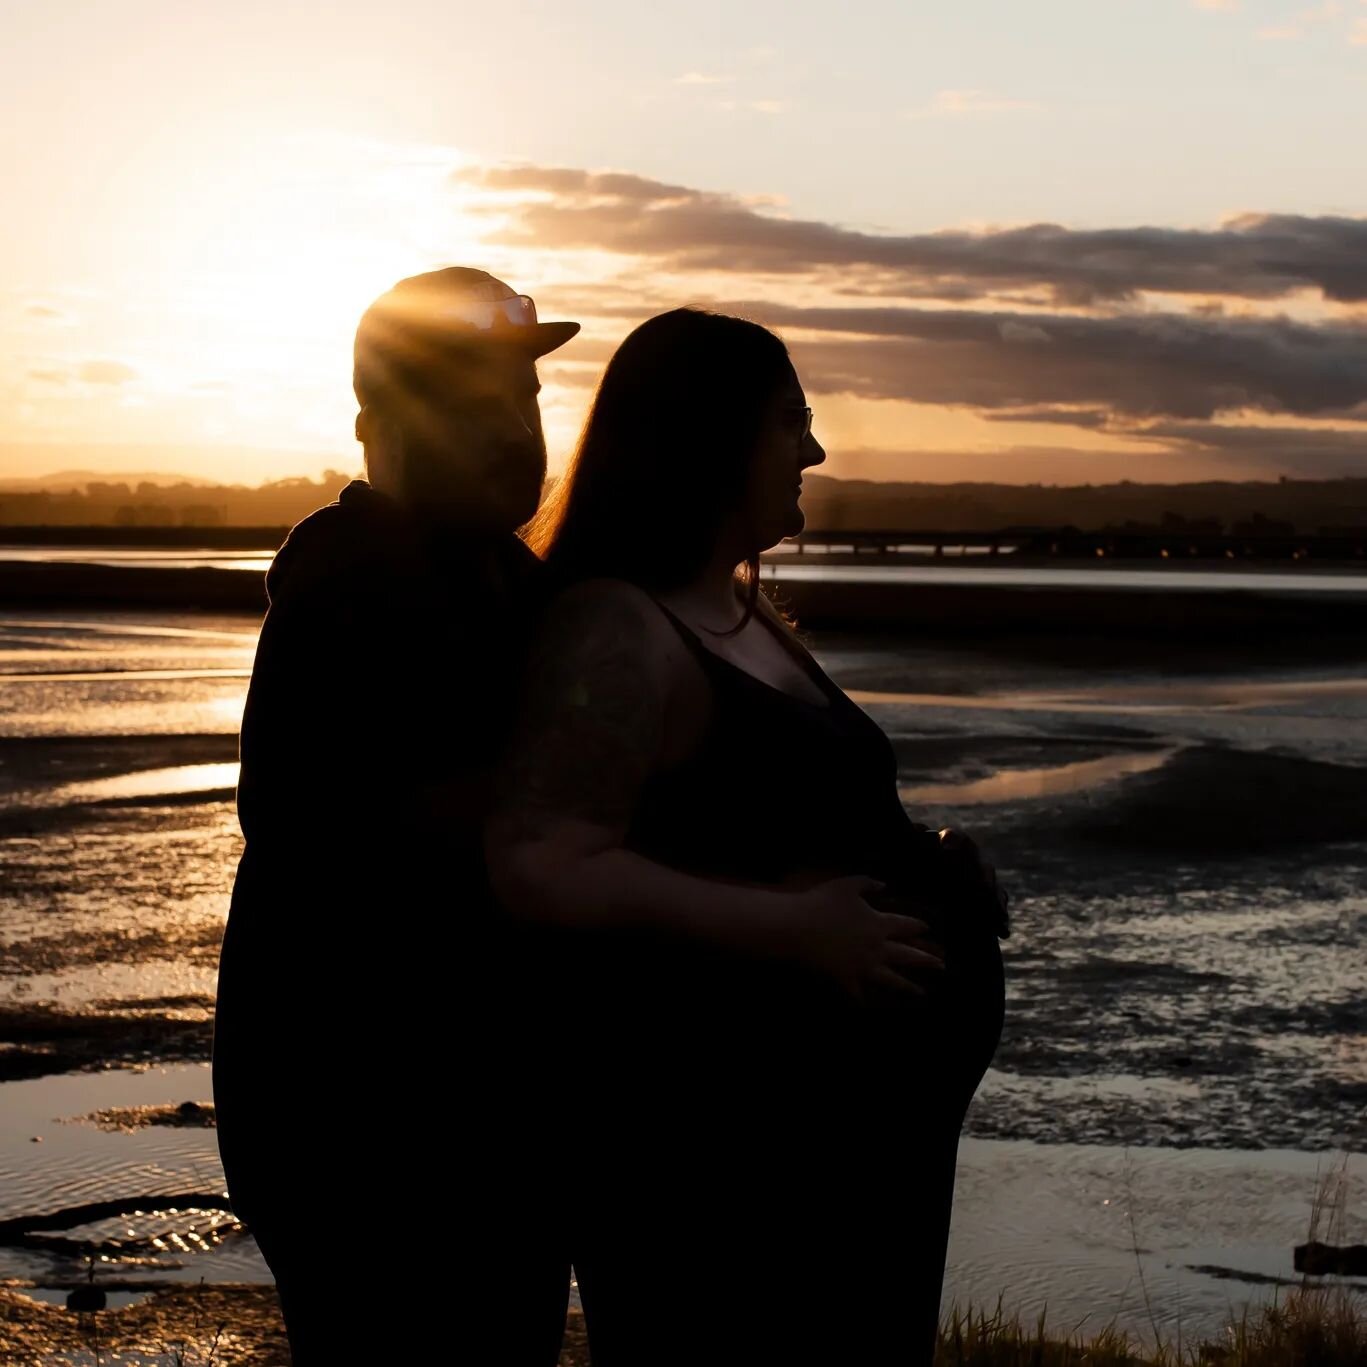 &ldquo;A grand adventure is about to begin.&rdquo; &mdash; Winnie the Pooh

What an incredibly special moment in your life, capture this moment to hold in your hearts forever 🥰

Get in touch with me today for information on booking your maternity se